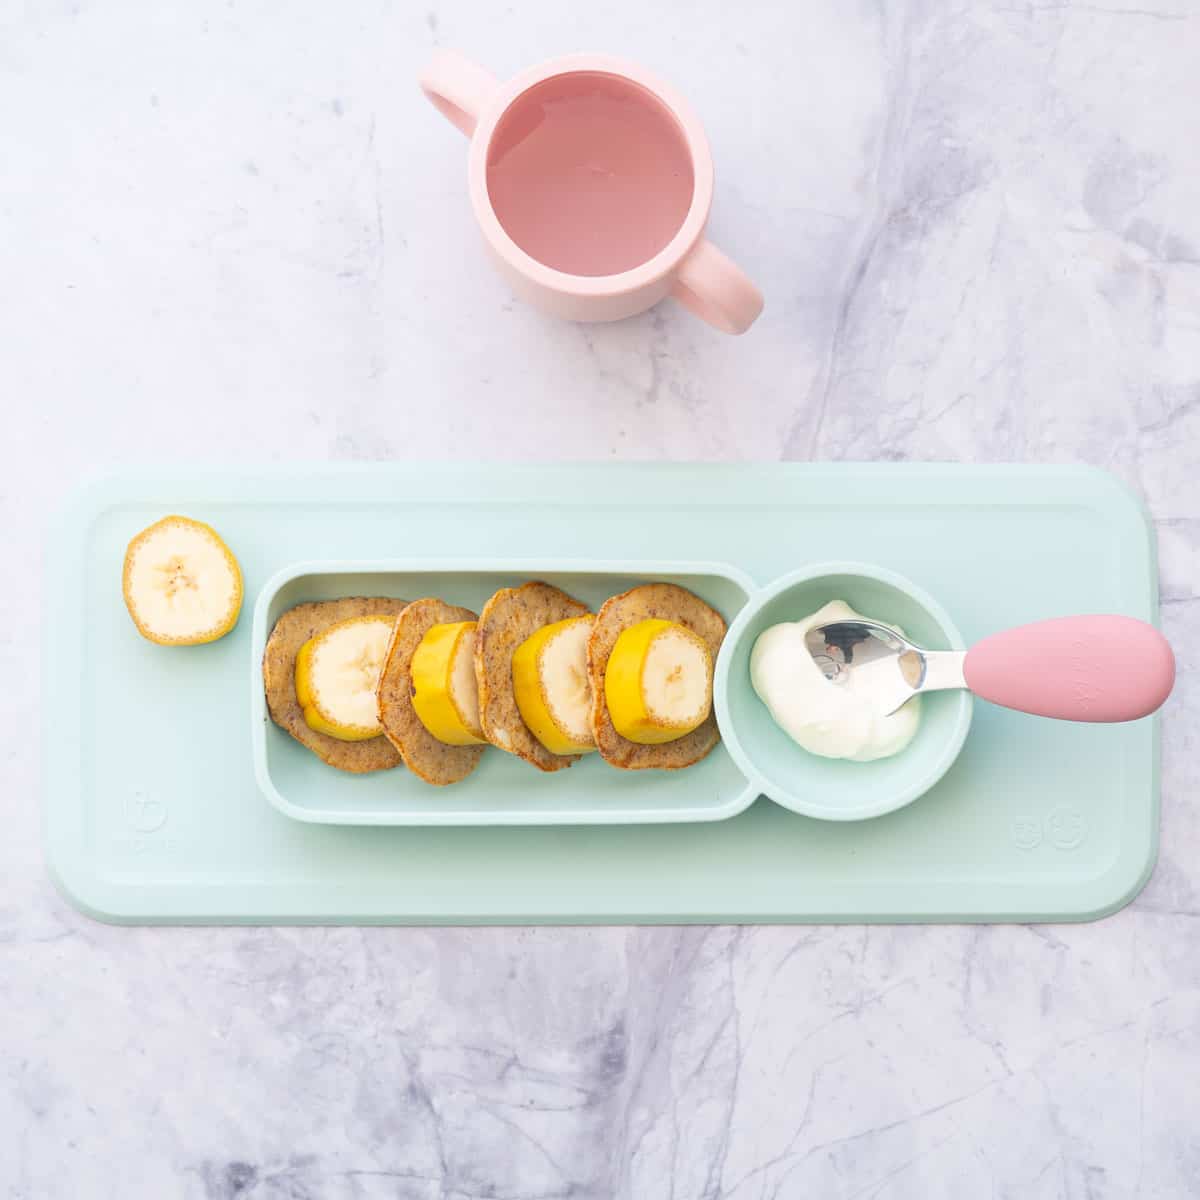 Banana slices, pancakes and yogurt on a mint green baby plate with a pink handled spoon and pink sippy cup. 